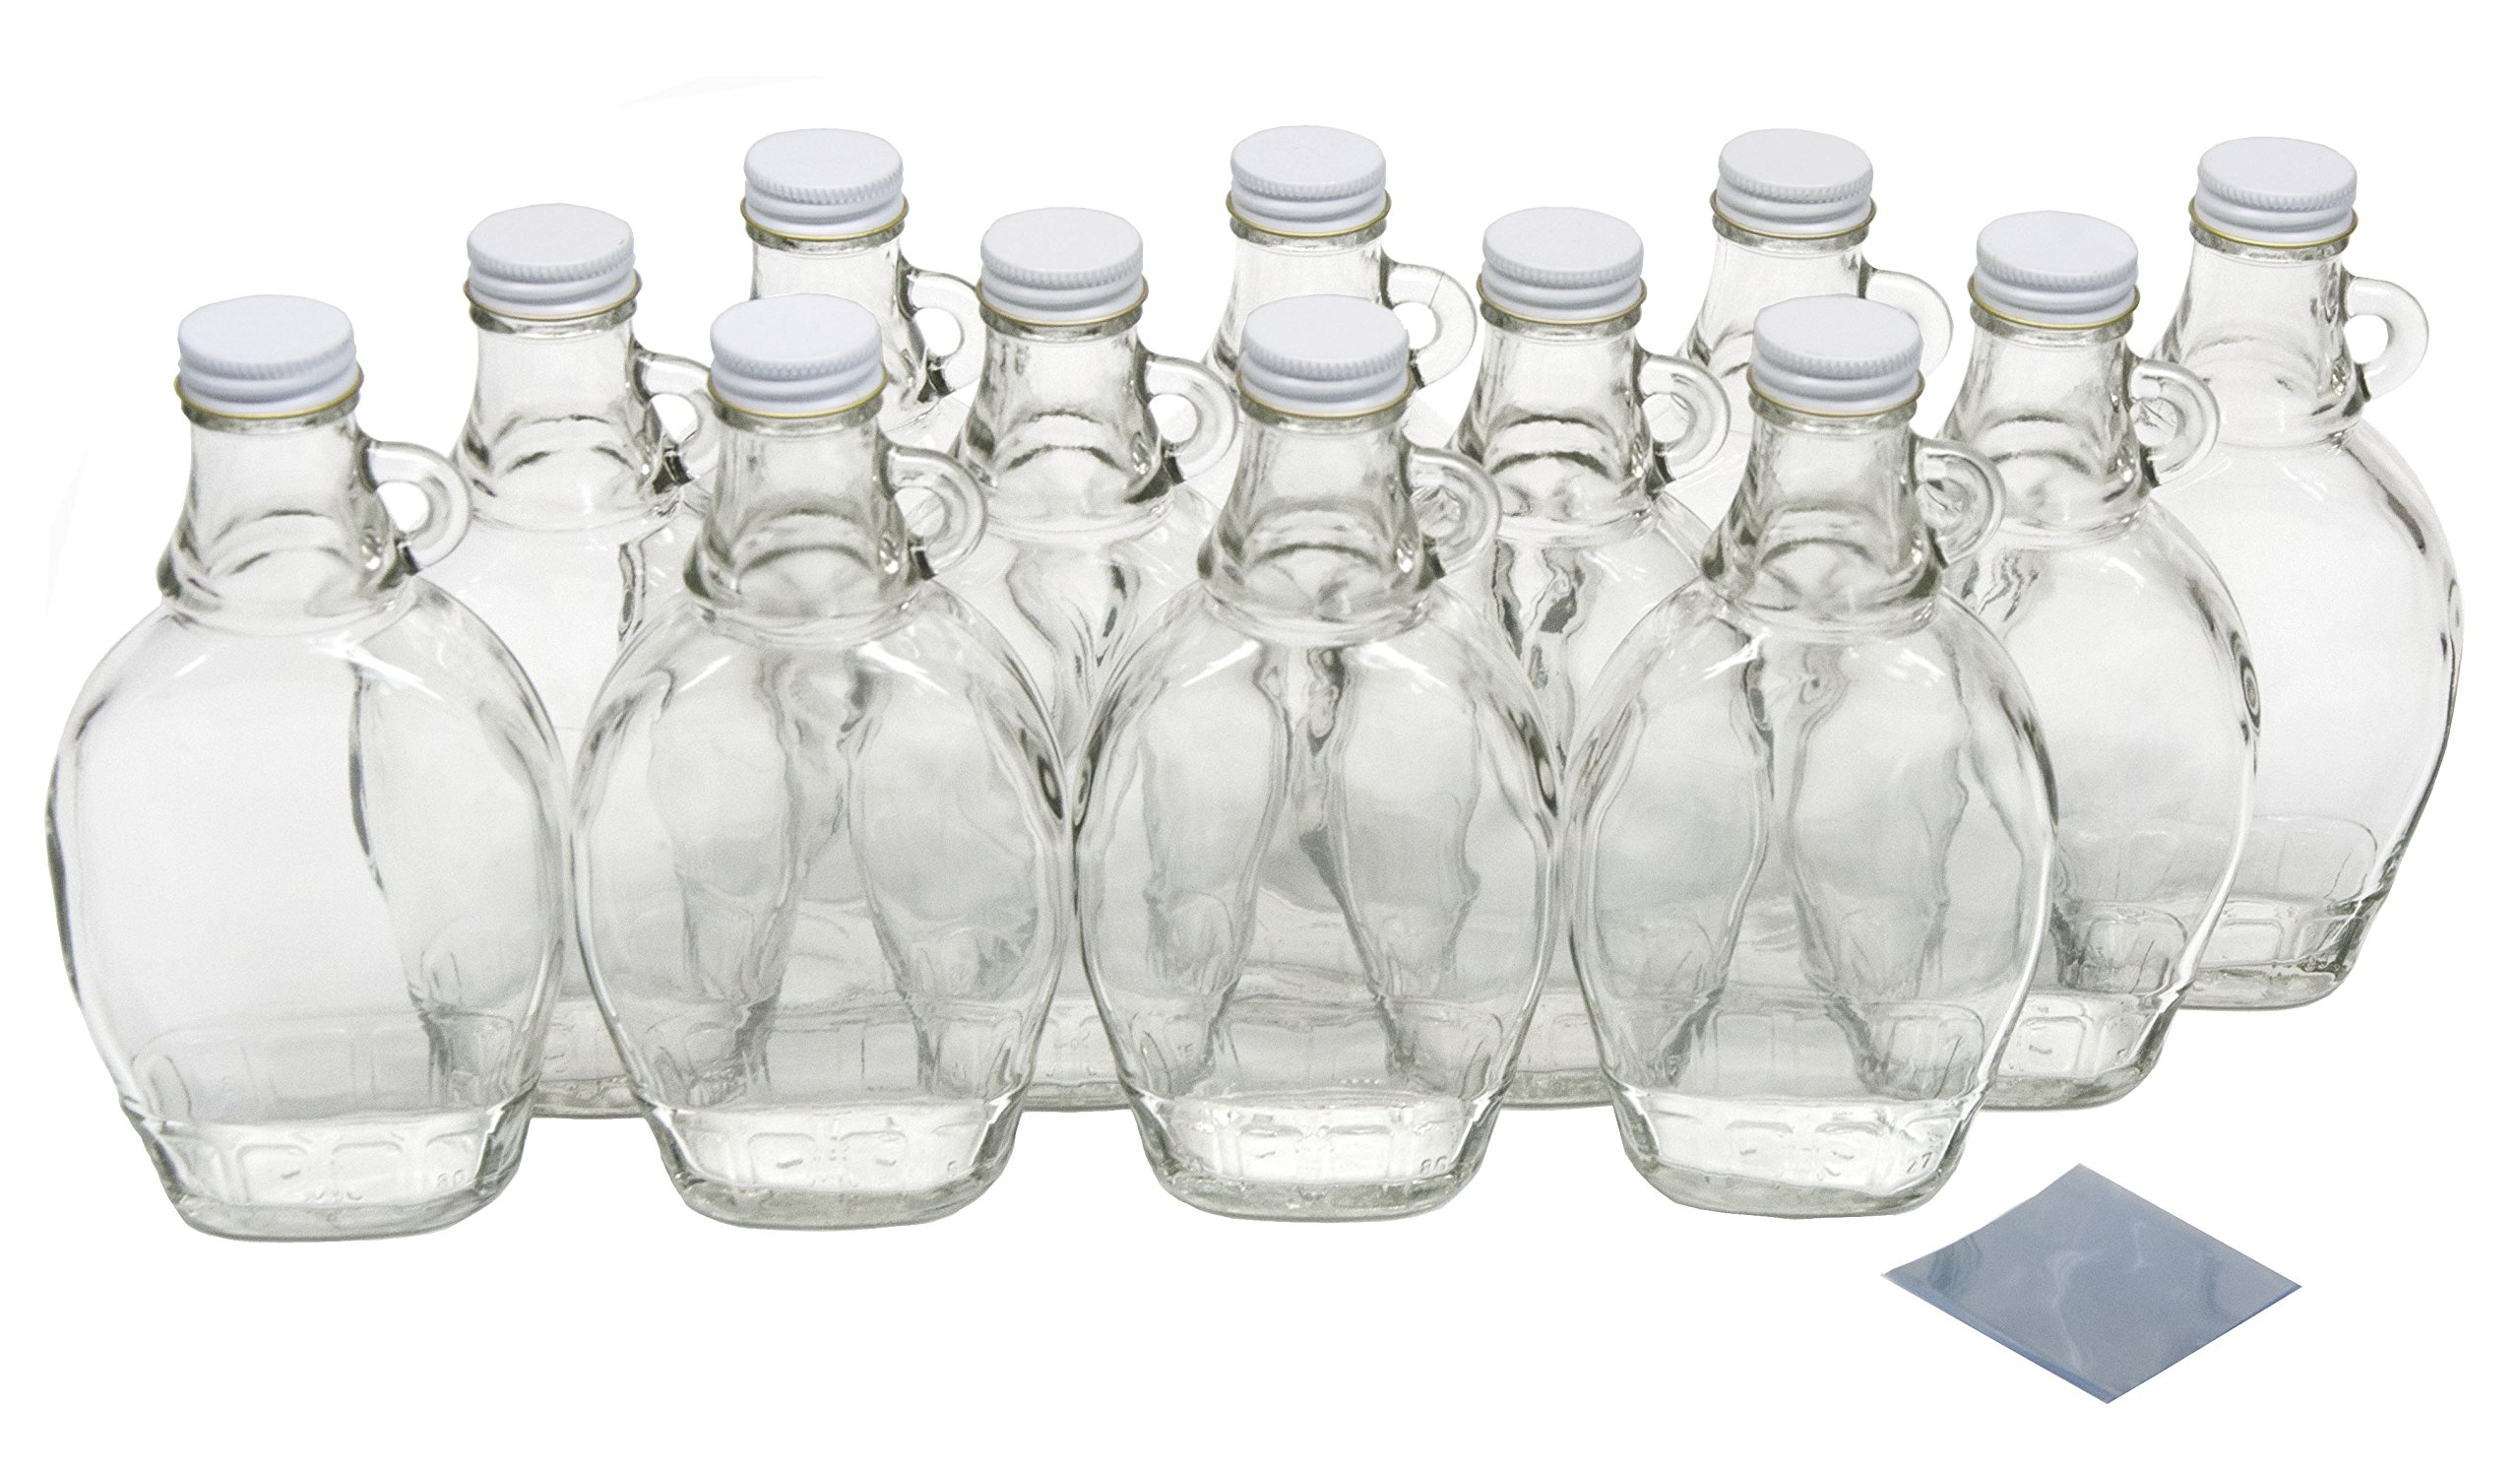 North Mountain Supply - MSJ-8oz 8 Ounce glass Maple Syrup Bottles with Loop Handle & White Metal Lids & Shrink Bands - case of 1